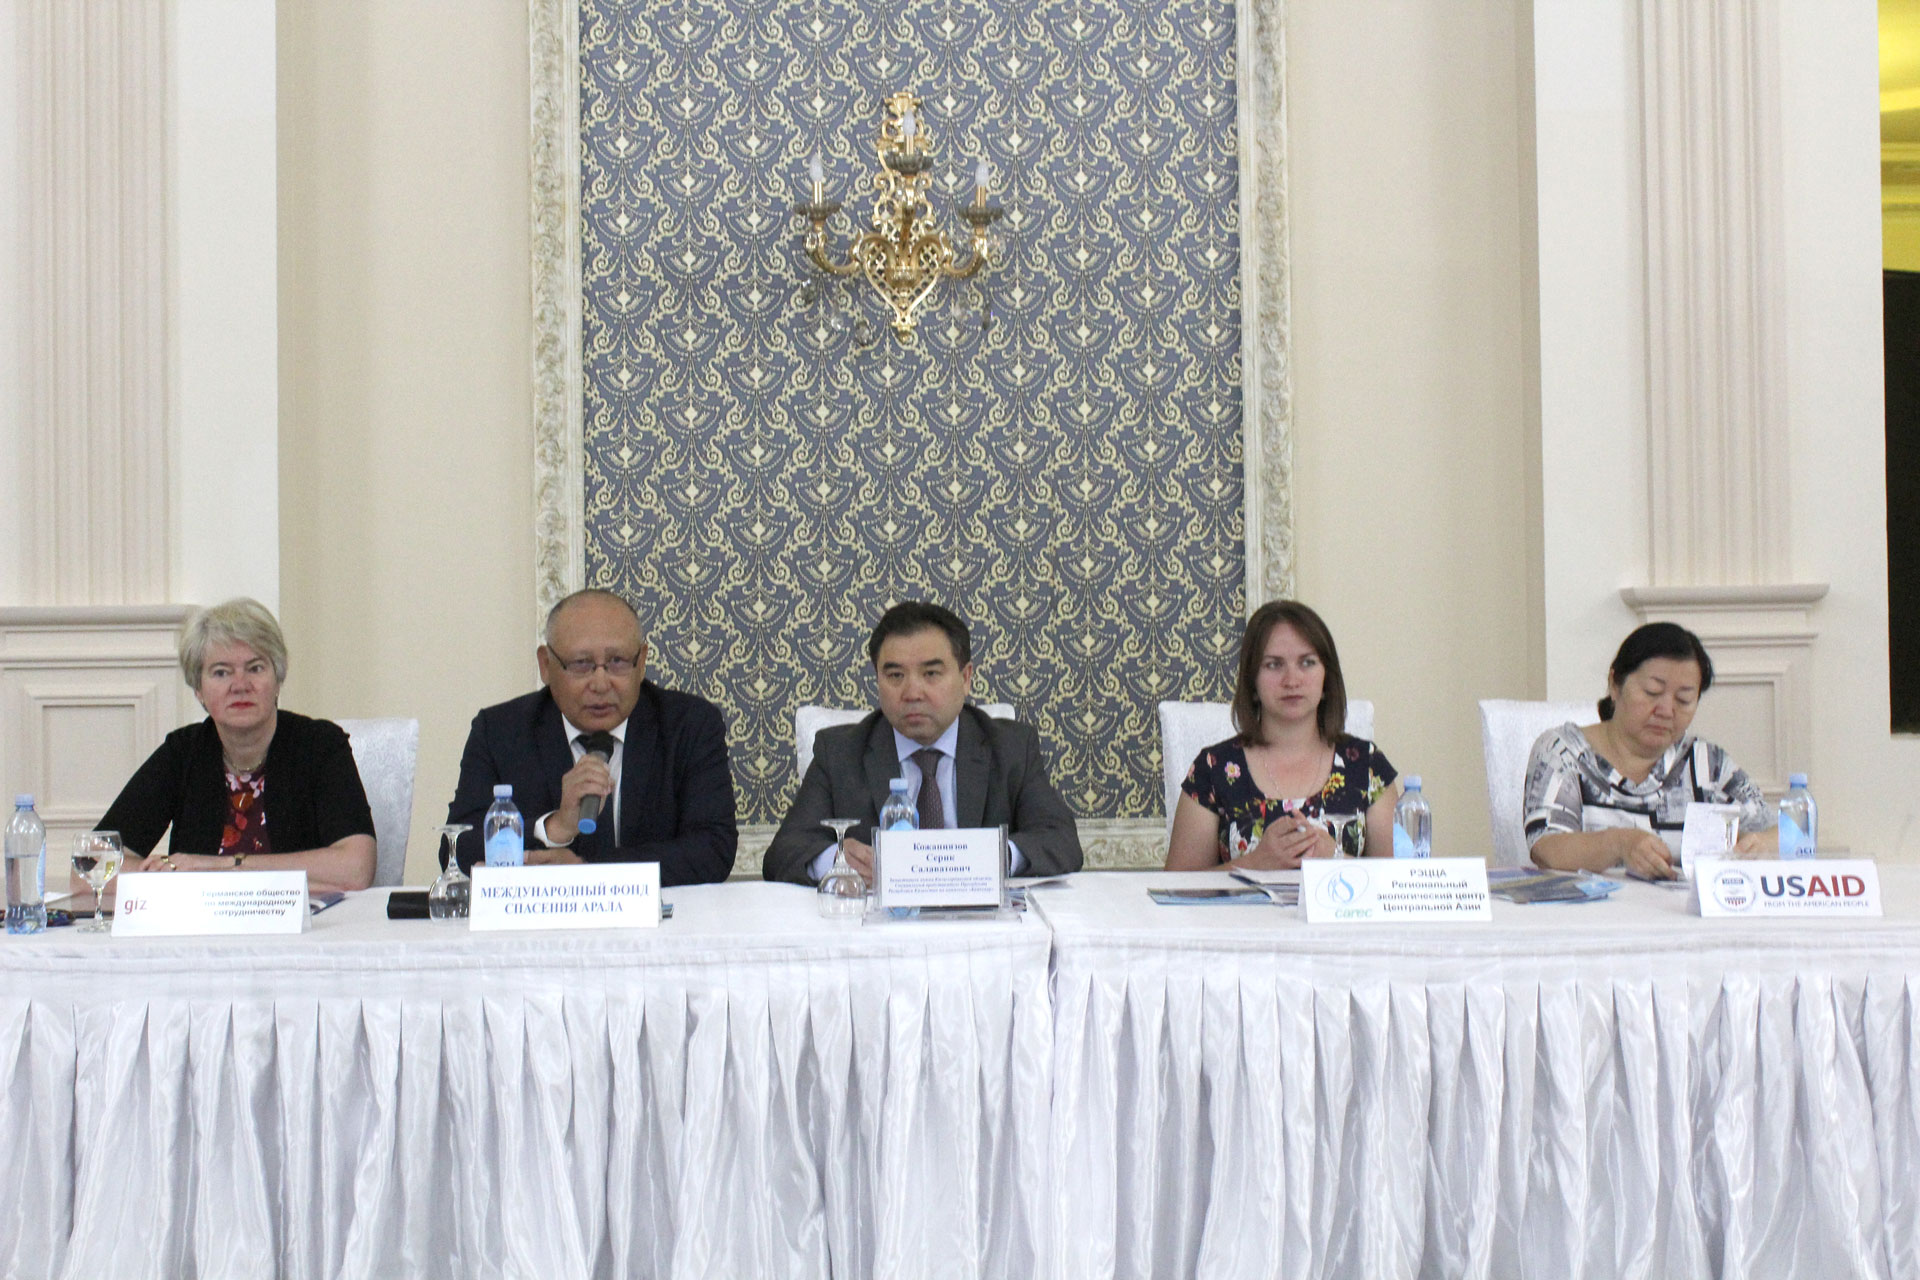 Kyzylorda hosted the conference on strengthening the cooperation in Aral Sea region